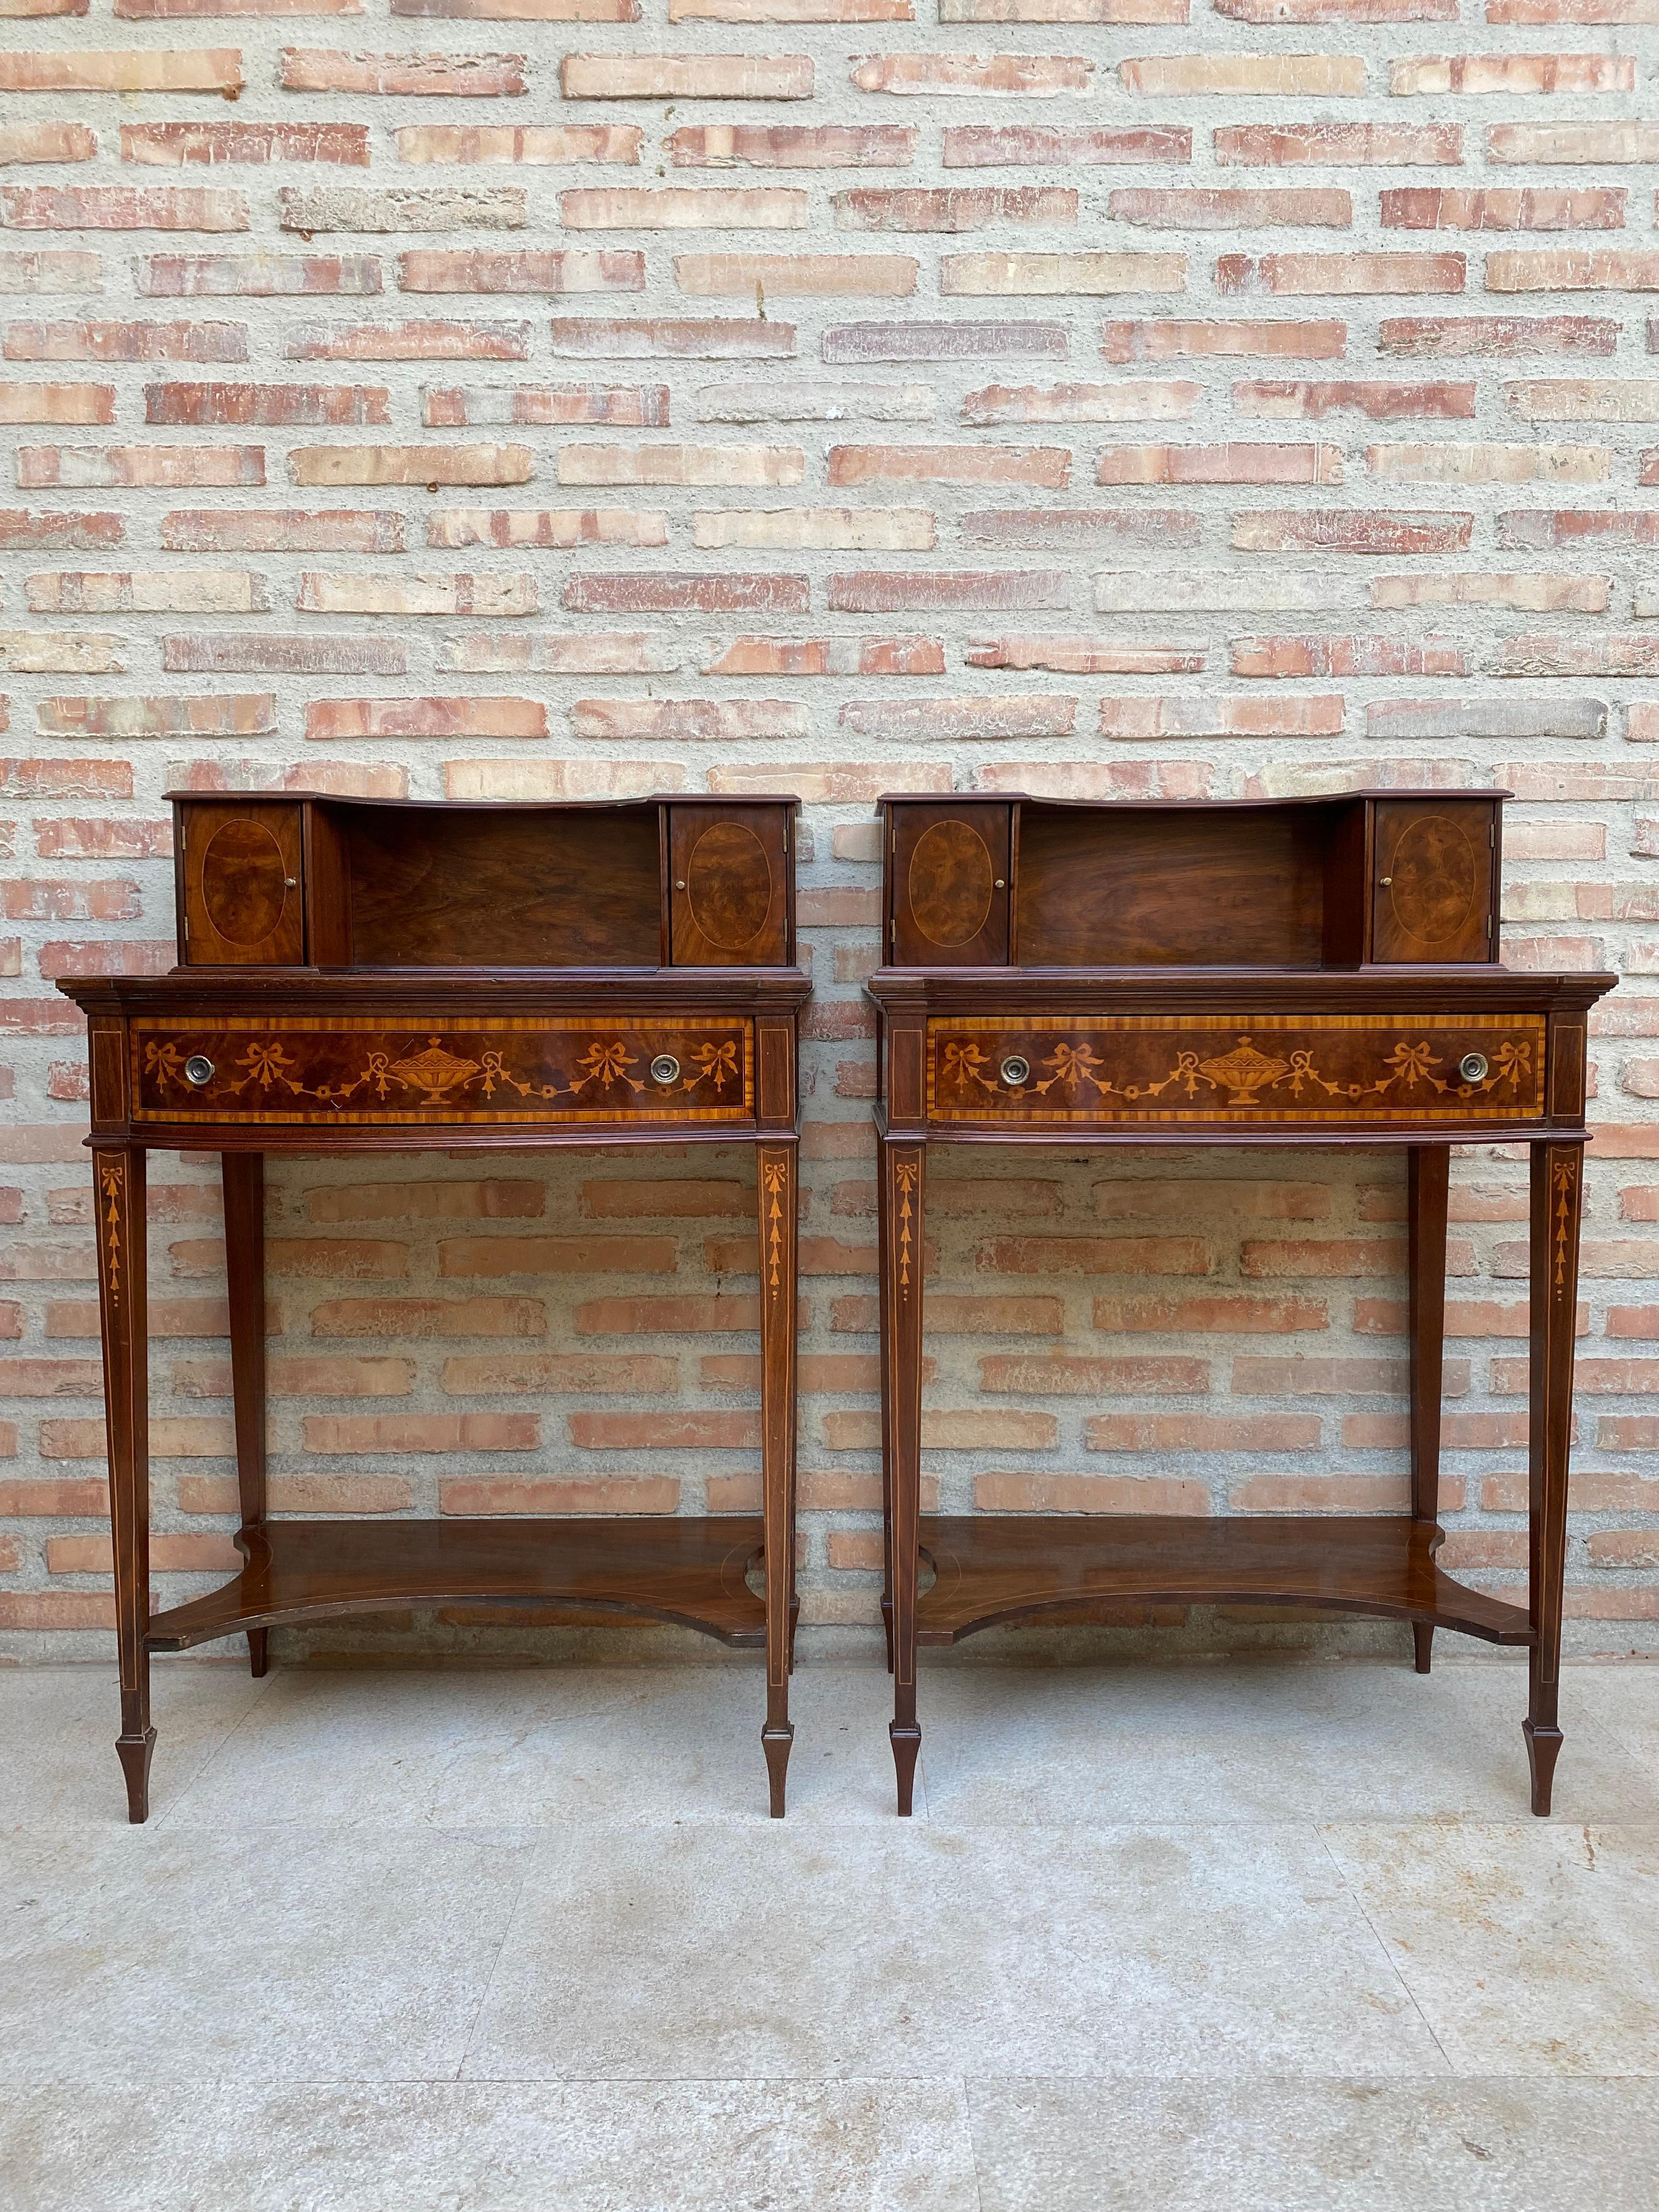 Pair of nightstands or secretary desk with French marquetry on the top, each one slightly oval in shape with a central drawer that has two bronze handles and frontal marquetry. On the top of the tables we find a small open shelf with two small